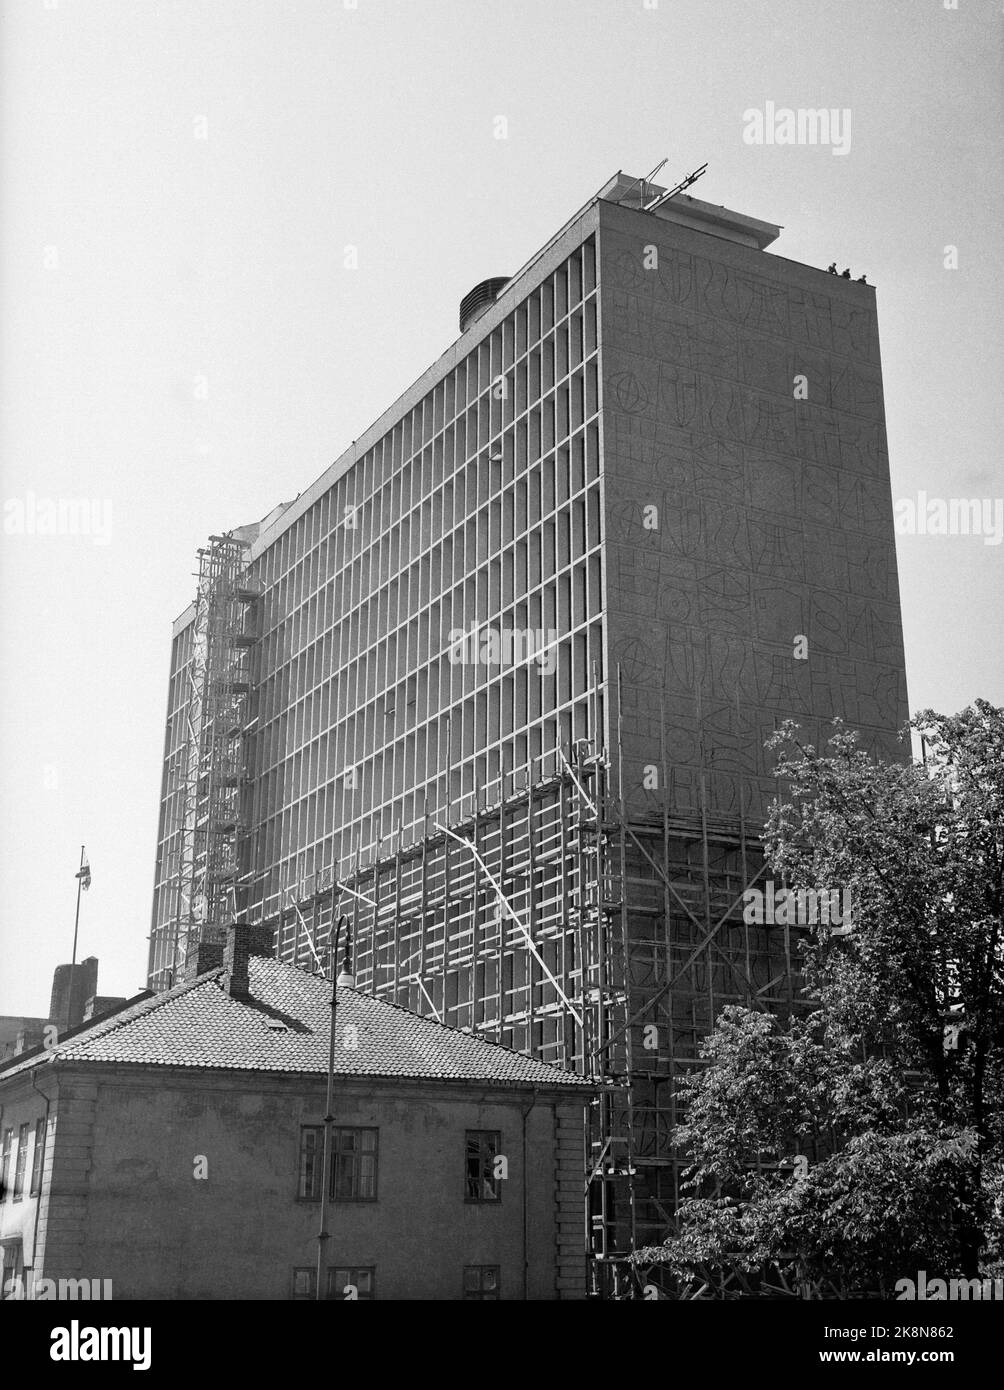 Oslo 19580724. The new government building under construction, June 1958. The artwork on the facade are sandblasted reliefs with symbolic figures, designed by architect Erling Viksjø, who collaborated with the artist Carl Nesjar on the technical execution. Old buildings in the area have not yet been demolished. 17352 Photo: Jan Nordby/NTB Stock Photo